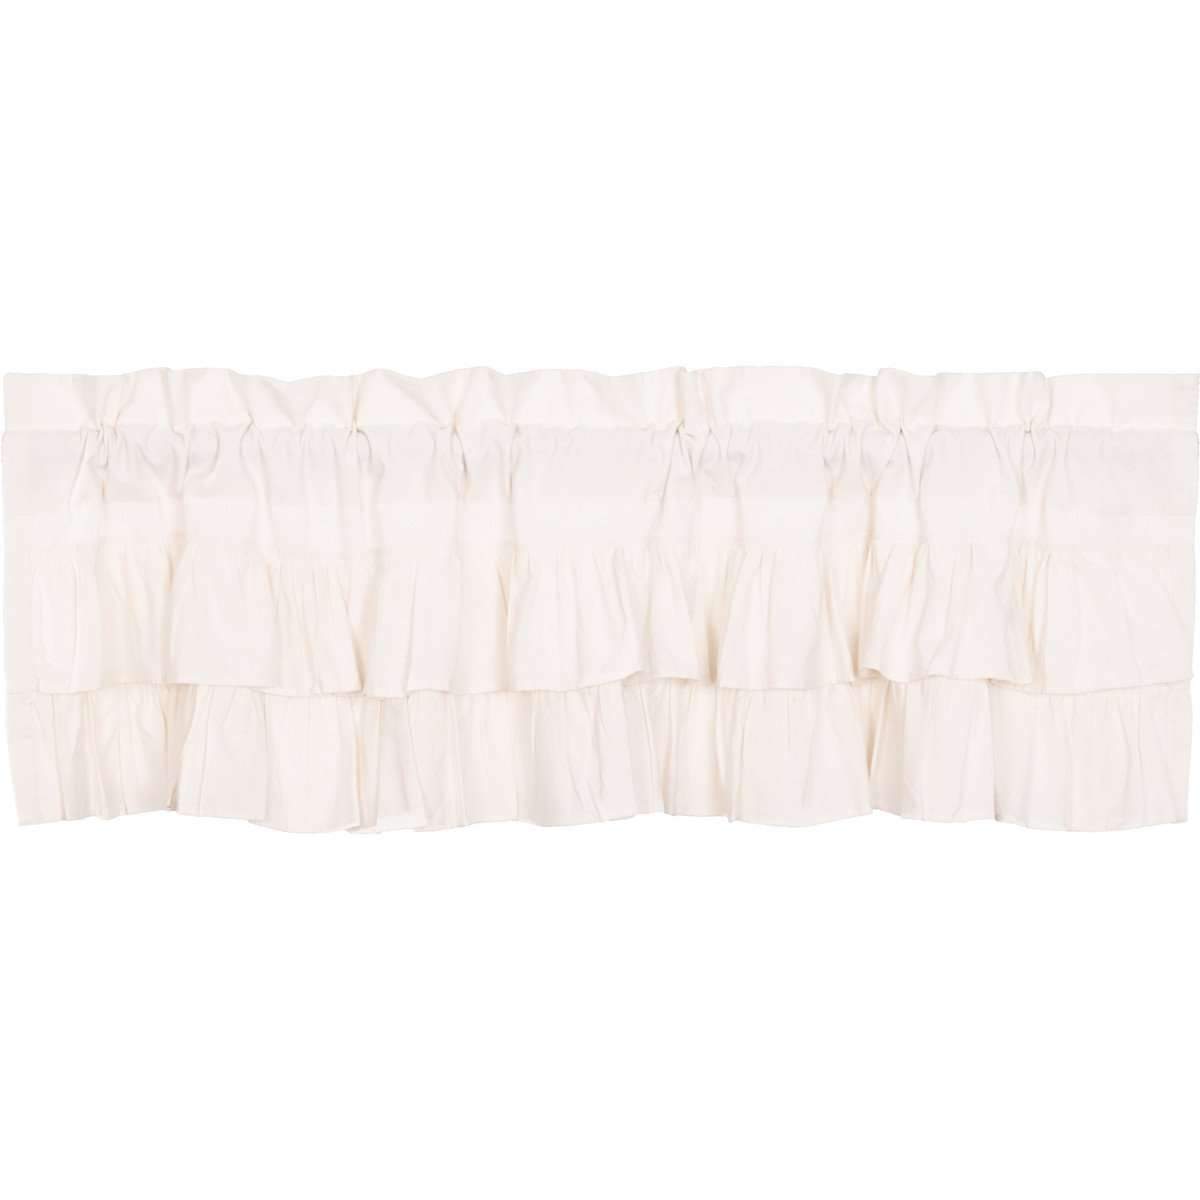 Simple Life Flax Antique White Ruffled Valance Curtain VHC Brands - The Fox Decor